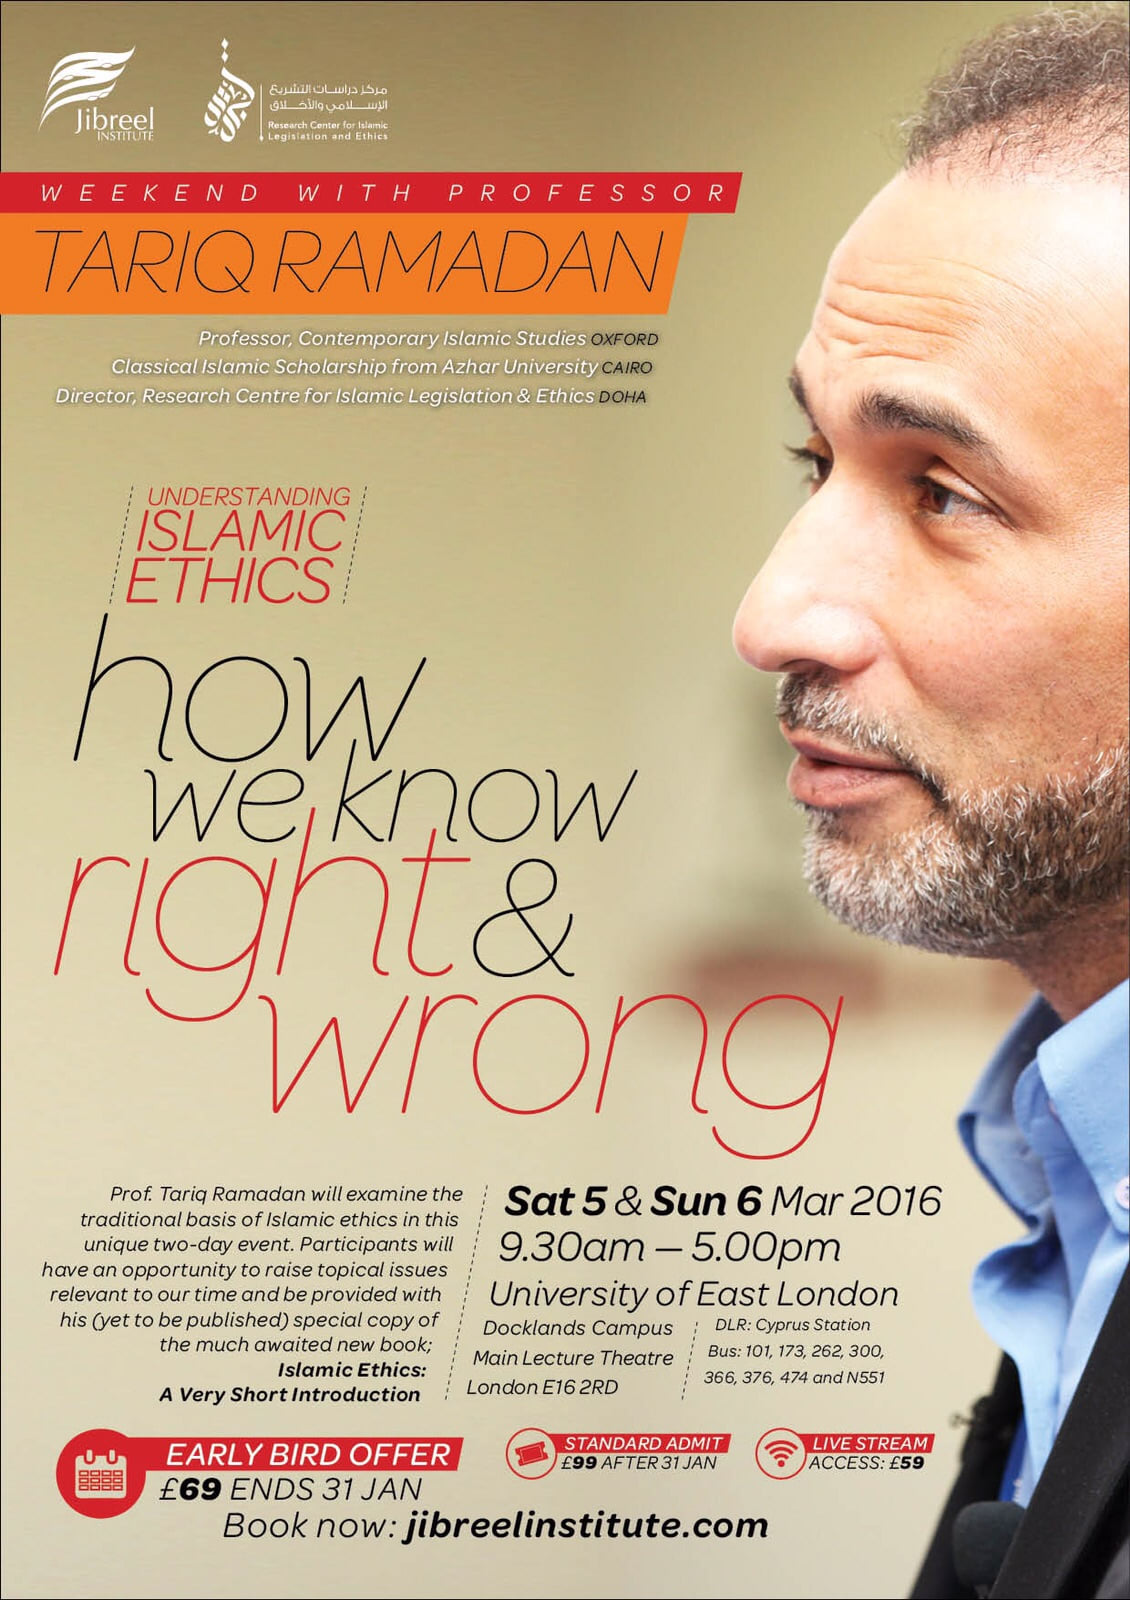 03/2016 Understanding Islamic Ethics: How we know right and wrong?